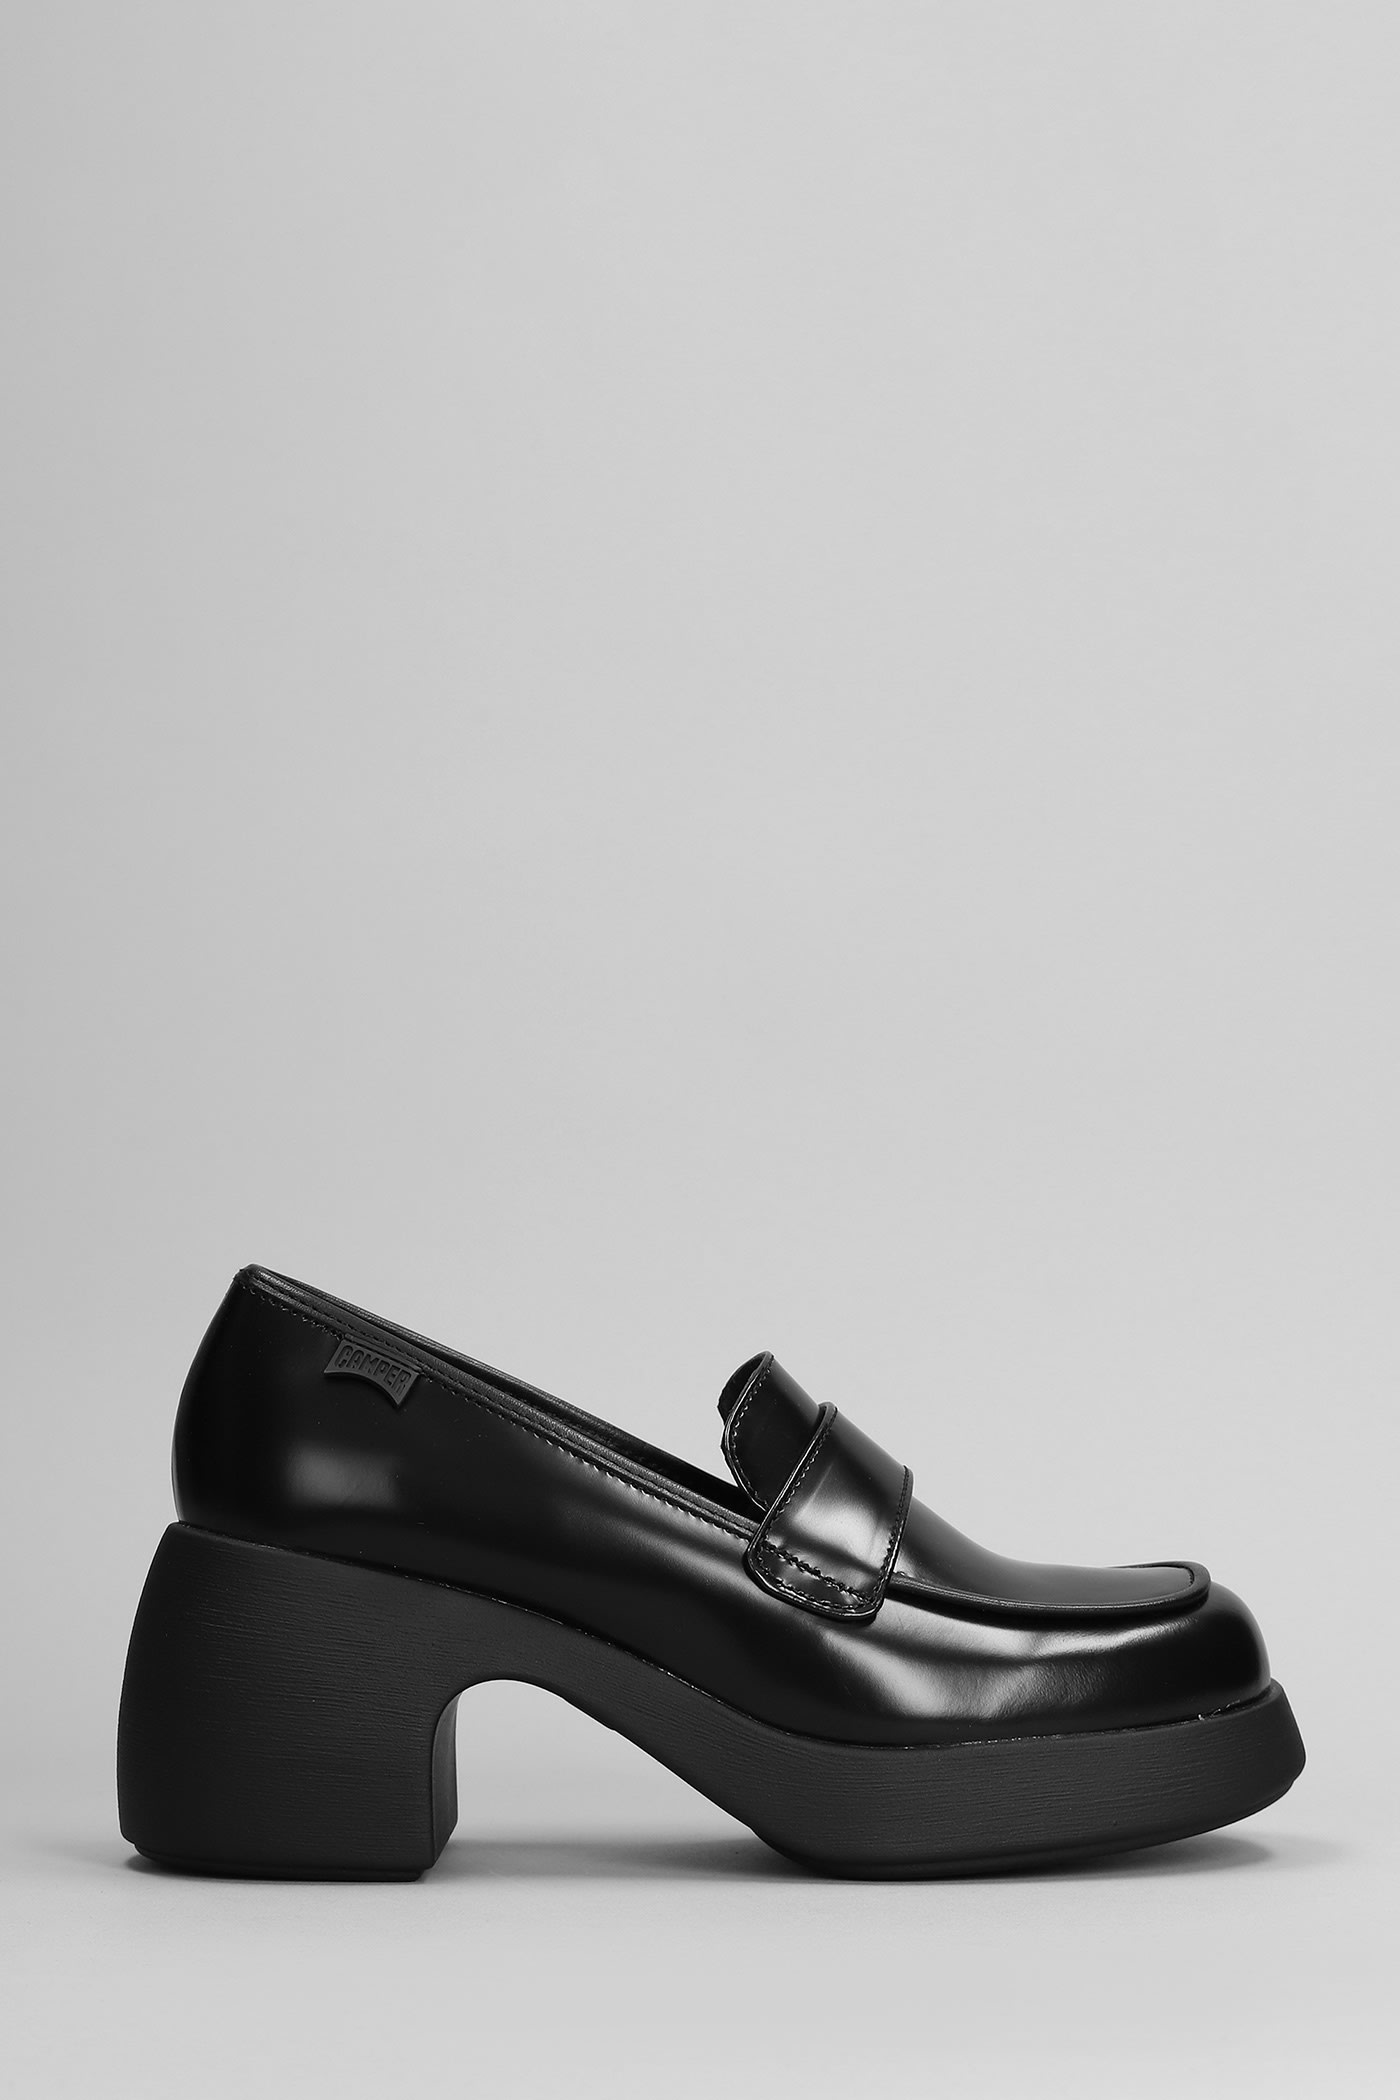 CAMPER THELMA PUMPS IN BLACK LEATHER